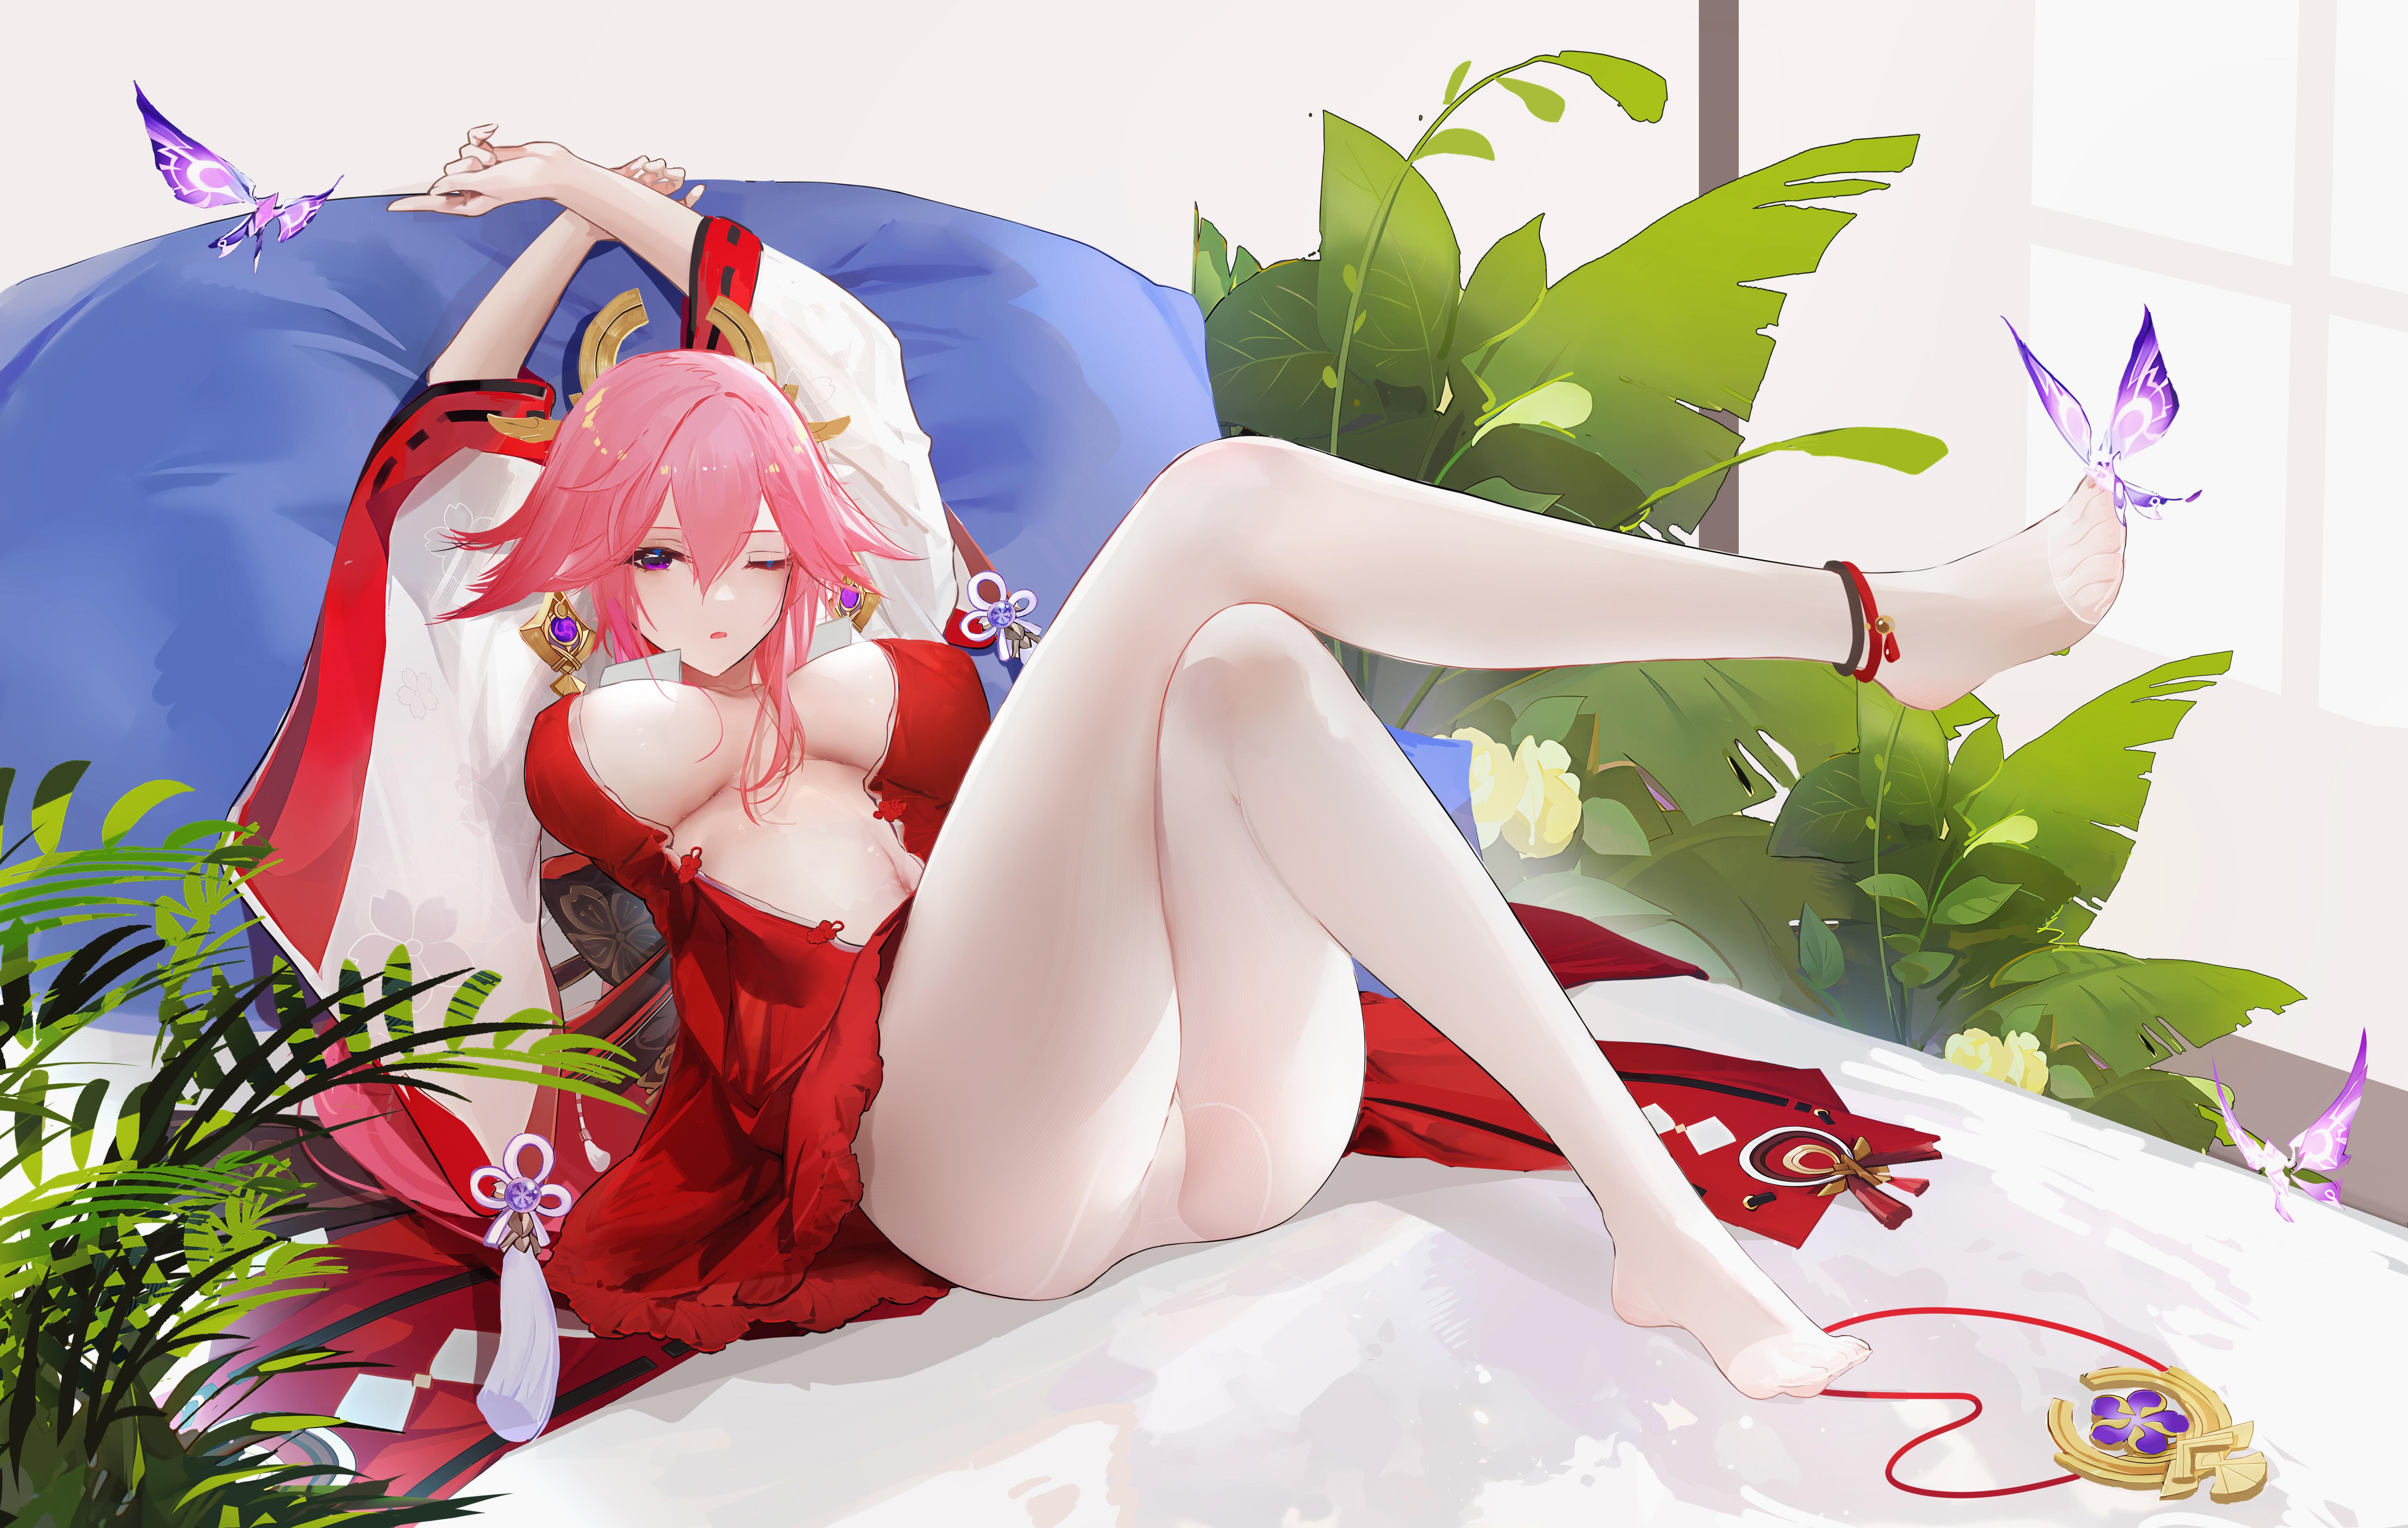 Anime 5800x3680 anime anime girls Omone Hokoma Agm pink hair boobs big boobs curvy thighs legs one eye closed hair in face red clothing looking at viewer butterfly animals insect plants open clothes red dress dress Genshin Impact Yae Miko (Genshin Impact)